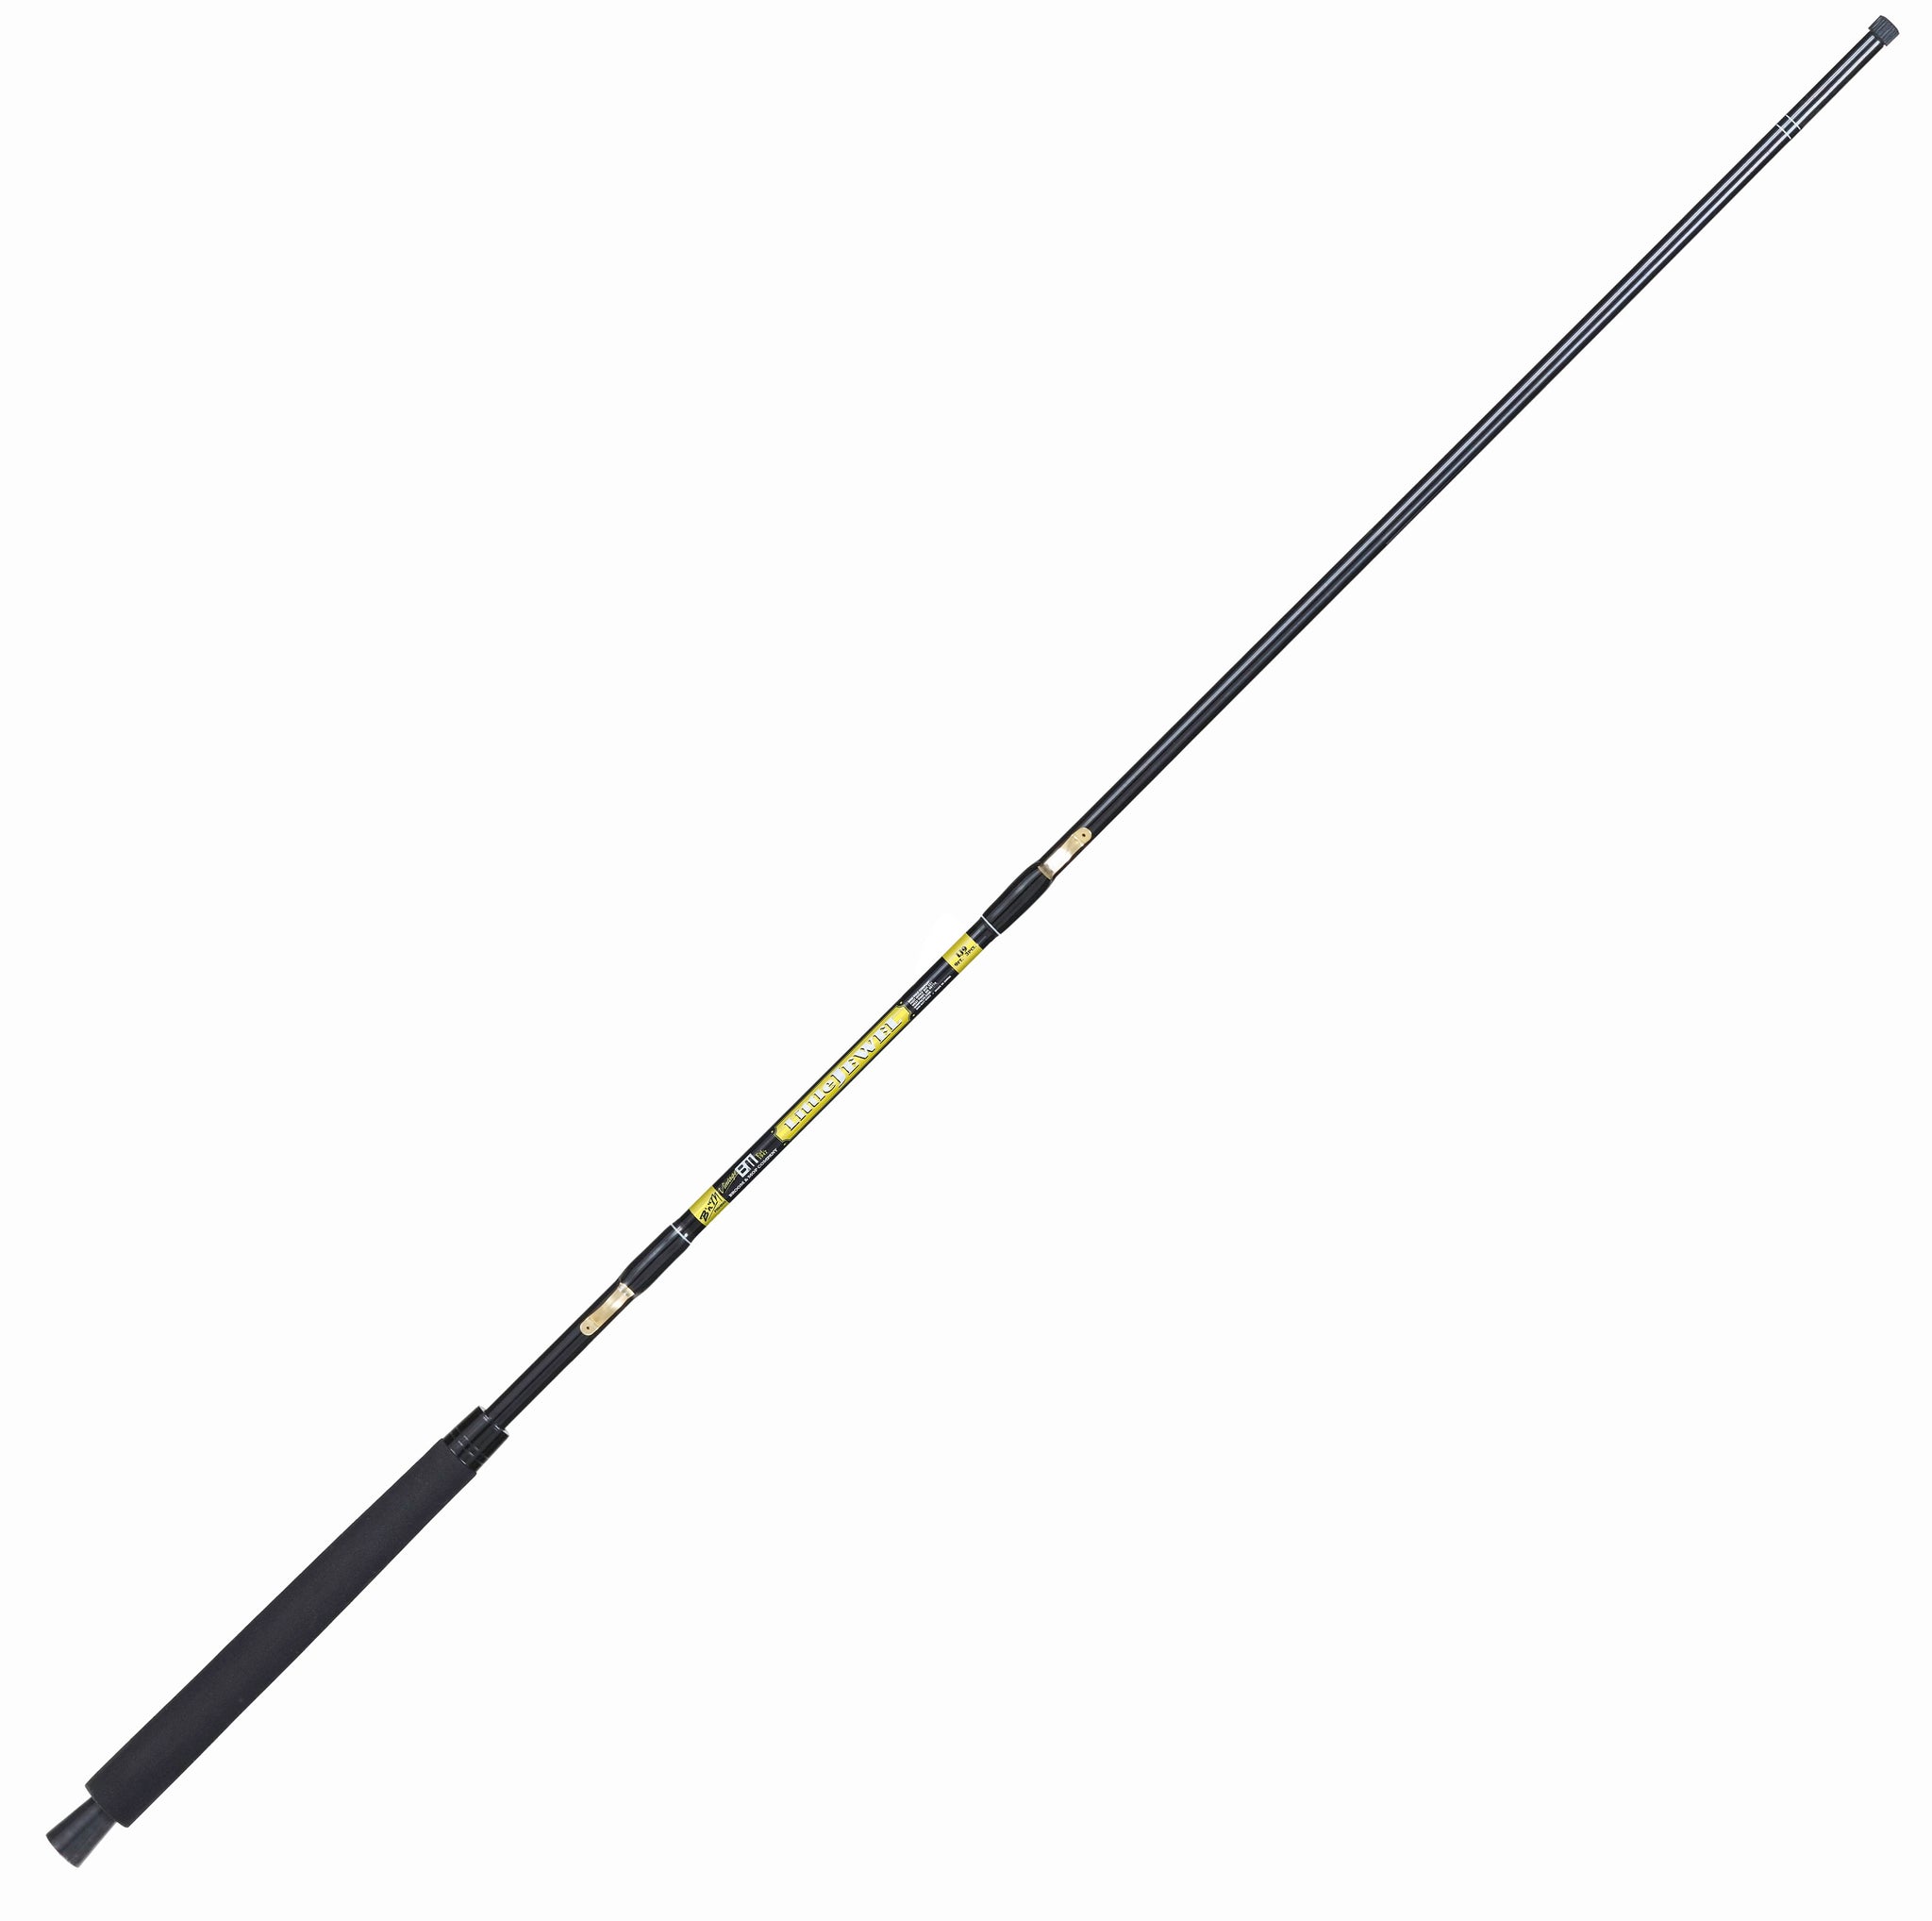  CYFIE 485cm 164Ft Retractable Telescopic Pole, Stainless  Steel Fishing Pole